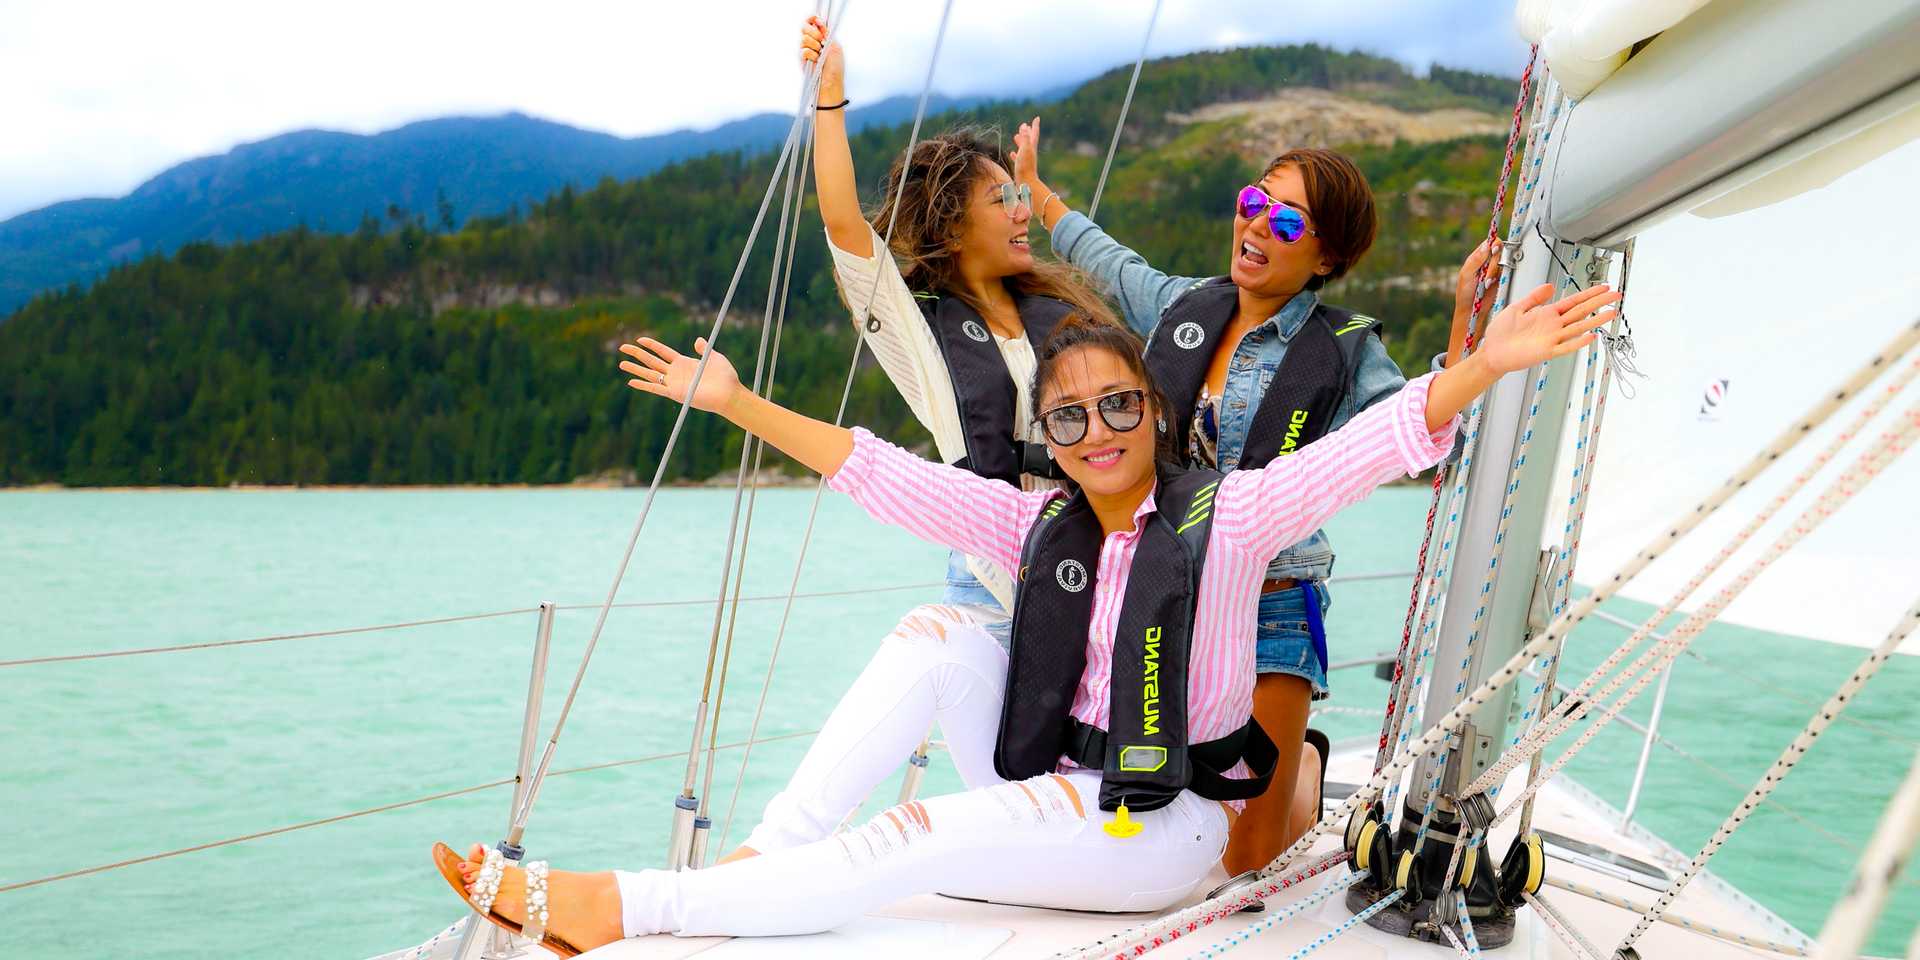 Pretty ladies celebrating a special occasion on a sailboat